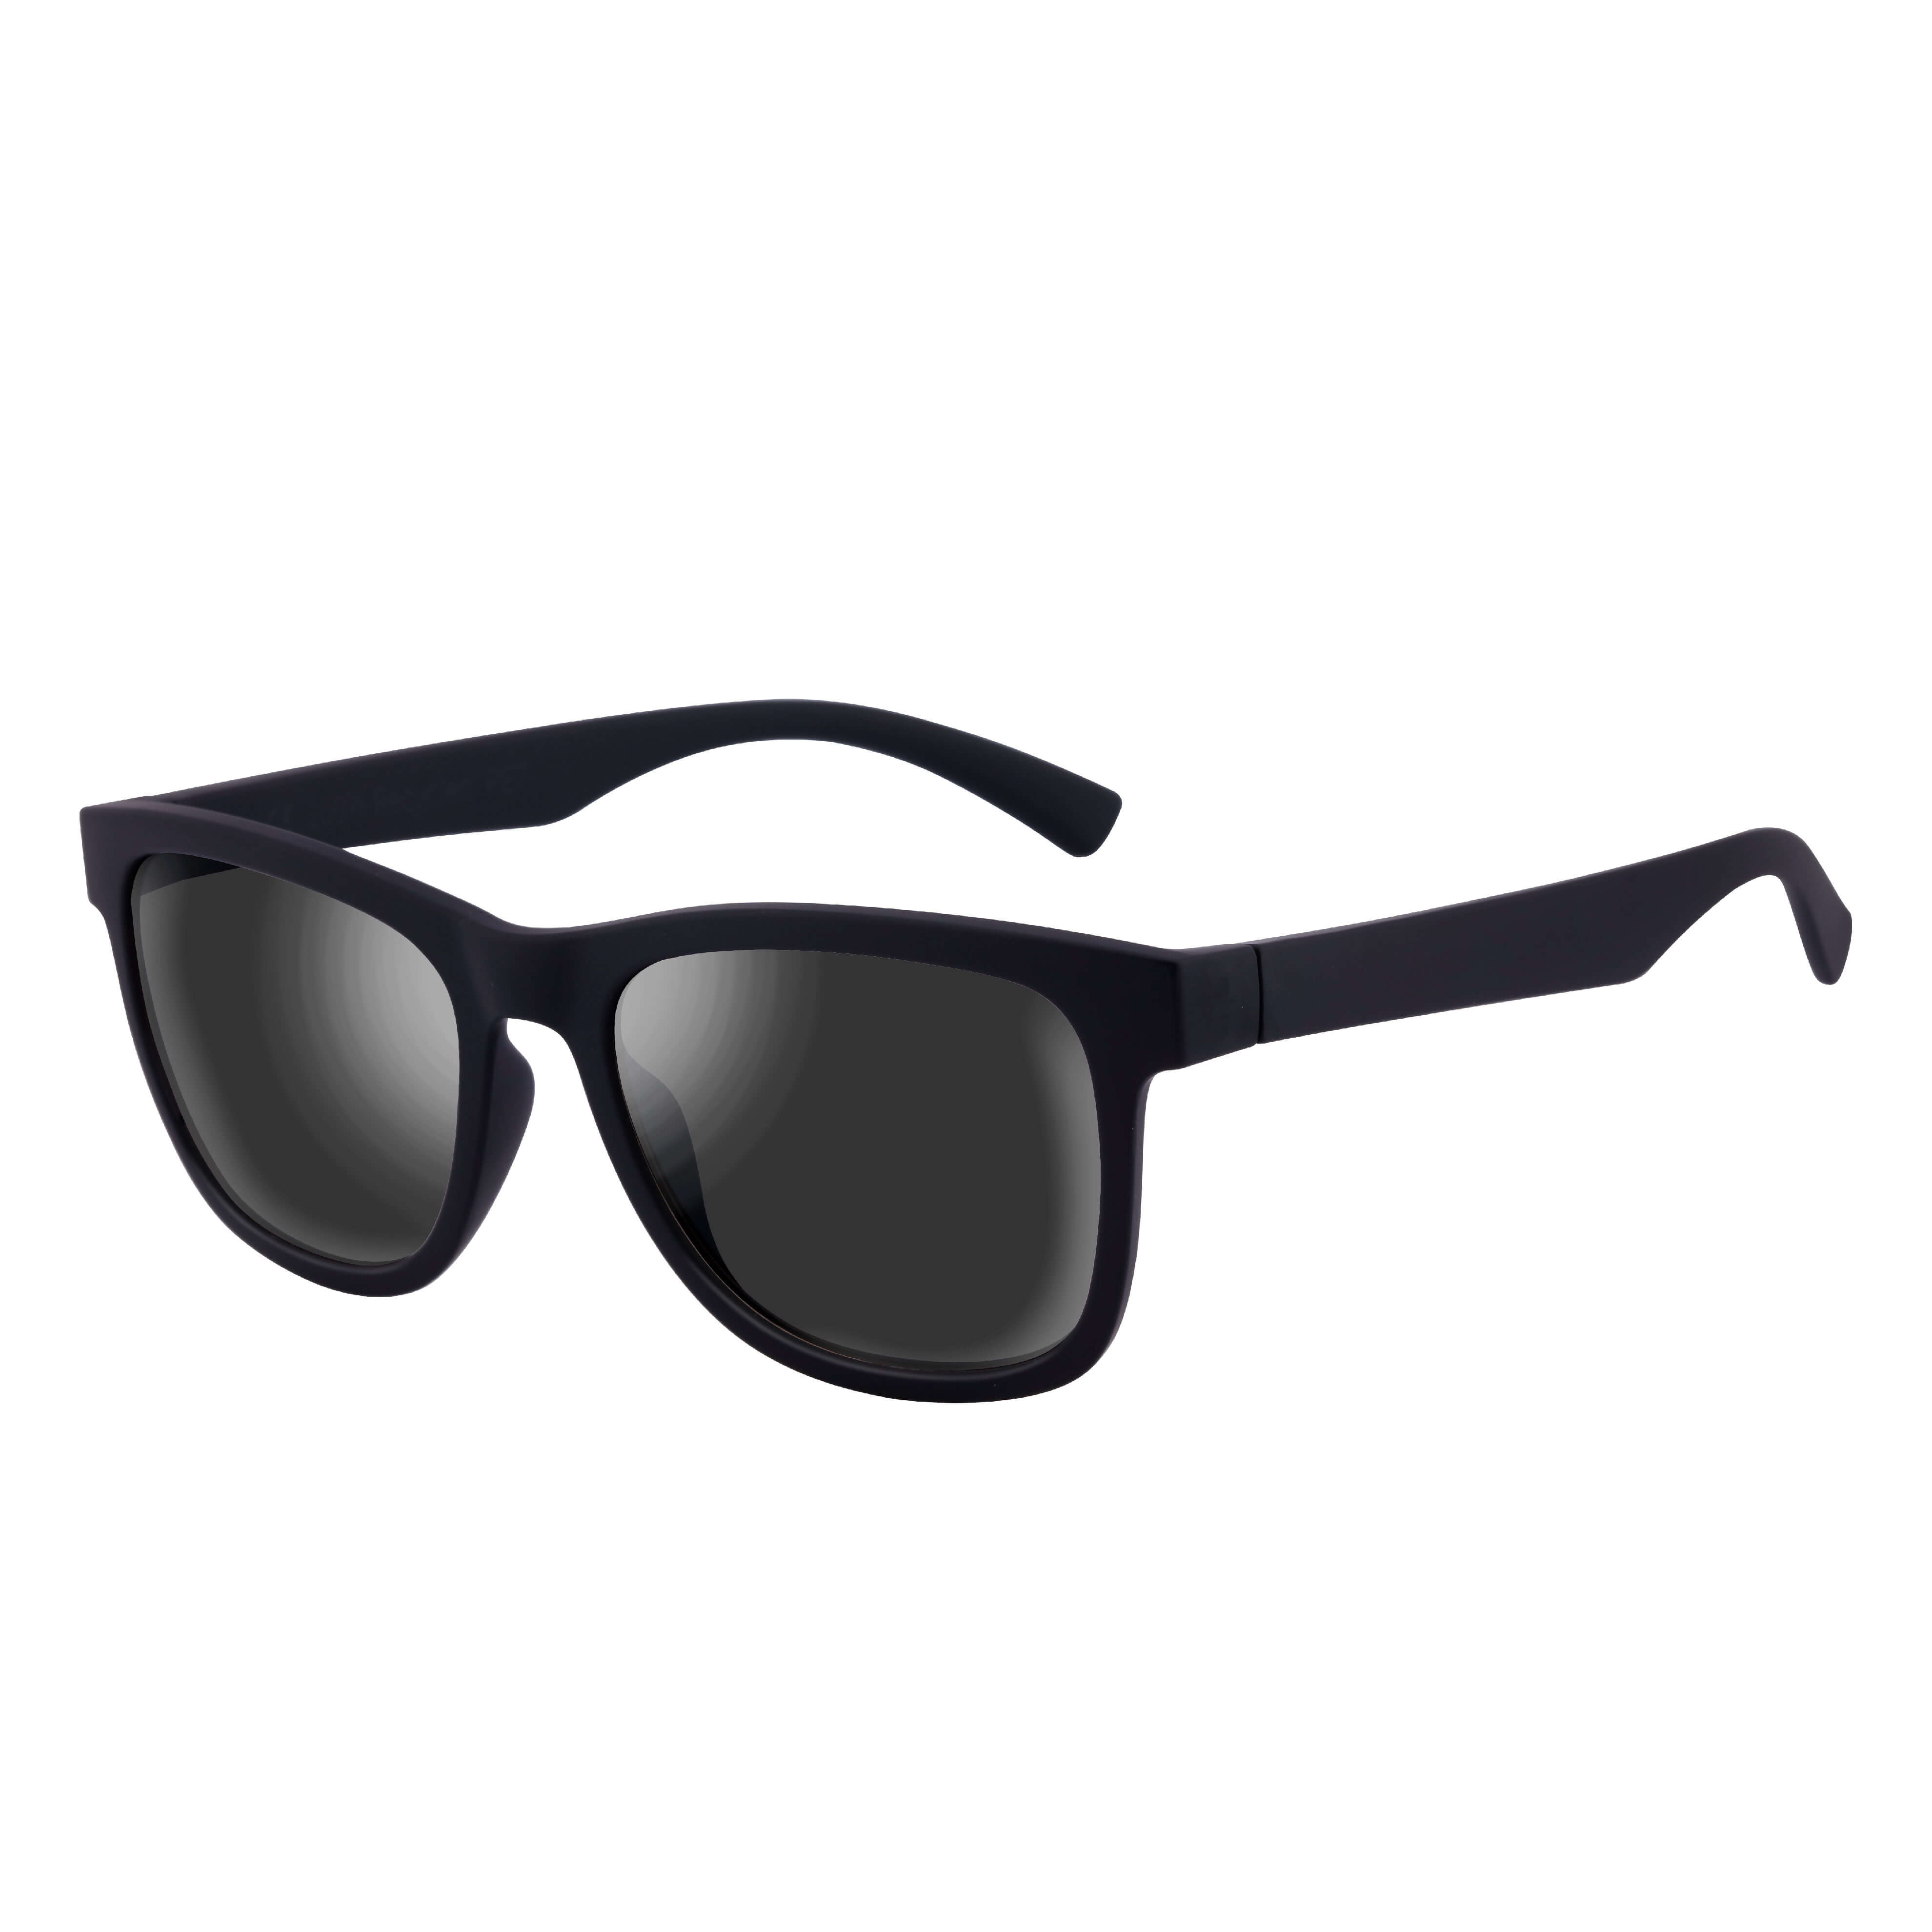 Unisex Sunglasses made with 100% Recycled and Sustainable Materials